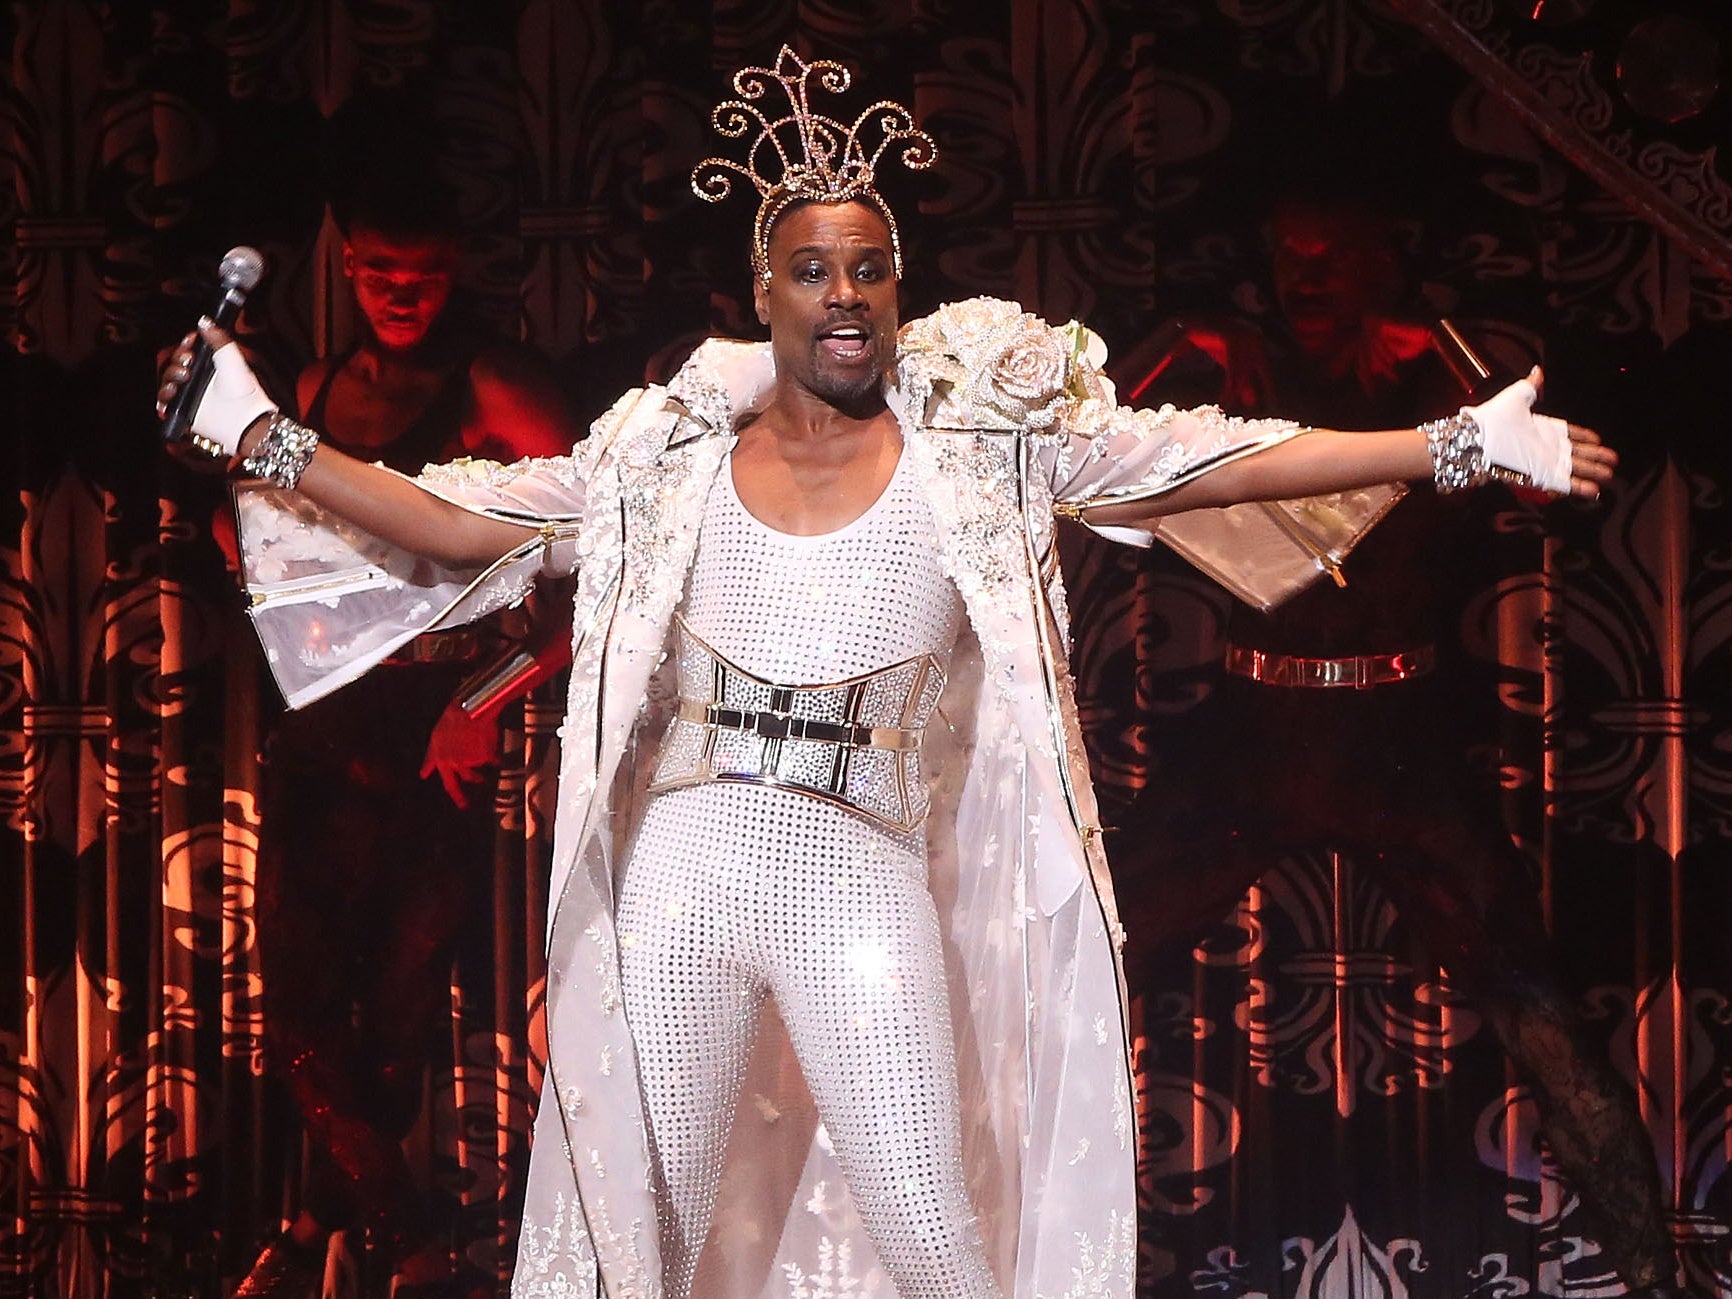 NYFW: Billy Porter Snatches Wigs With His Lady Marmalade Performance At The Blonds Fashion Show